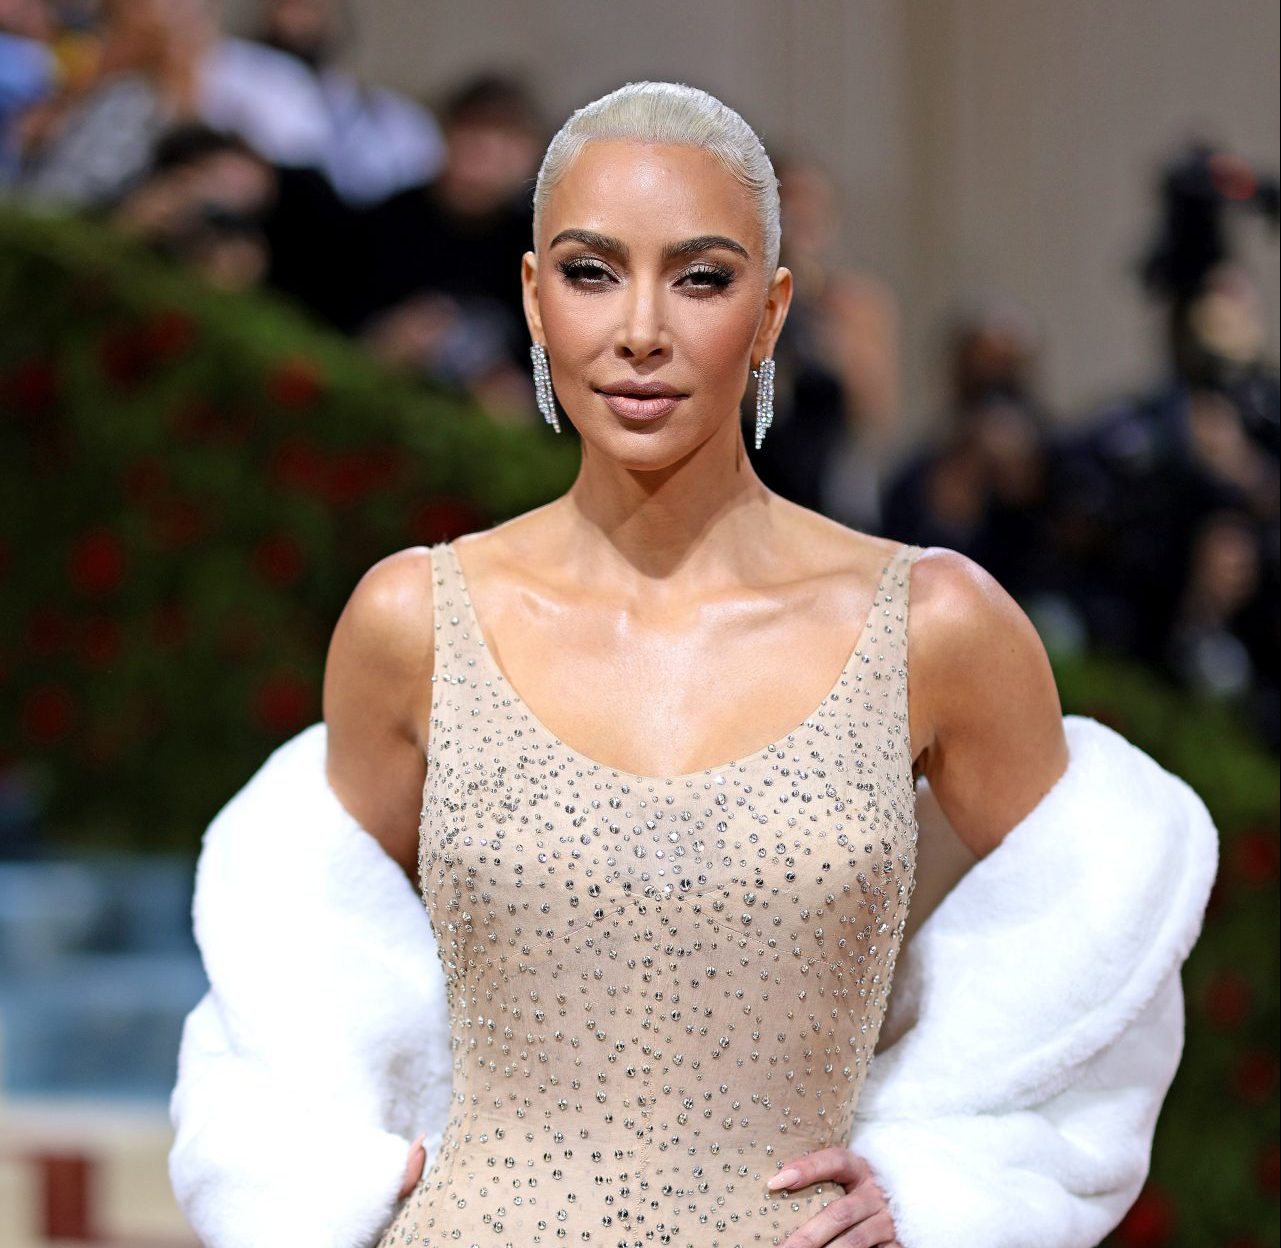 Representatives from the Ripley Museum have spoken out and said that Kim Kardashian did not damage Marilyn Monroe's dress after wearing it to the Met Gala.